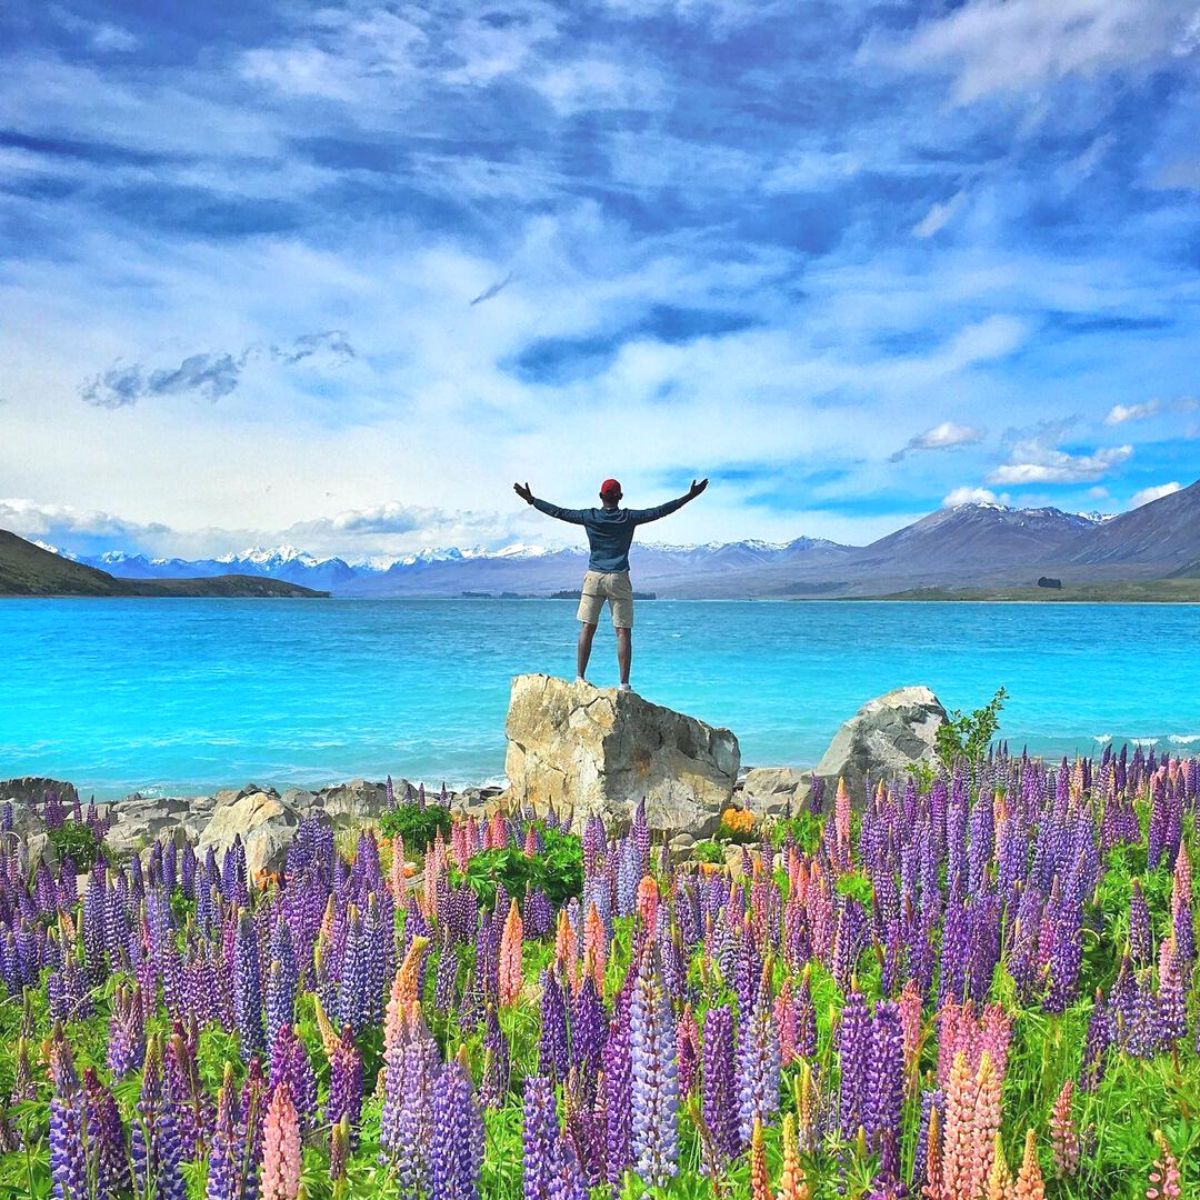 Lupin flowers by a lake in New Zealand region